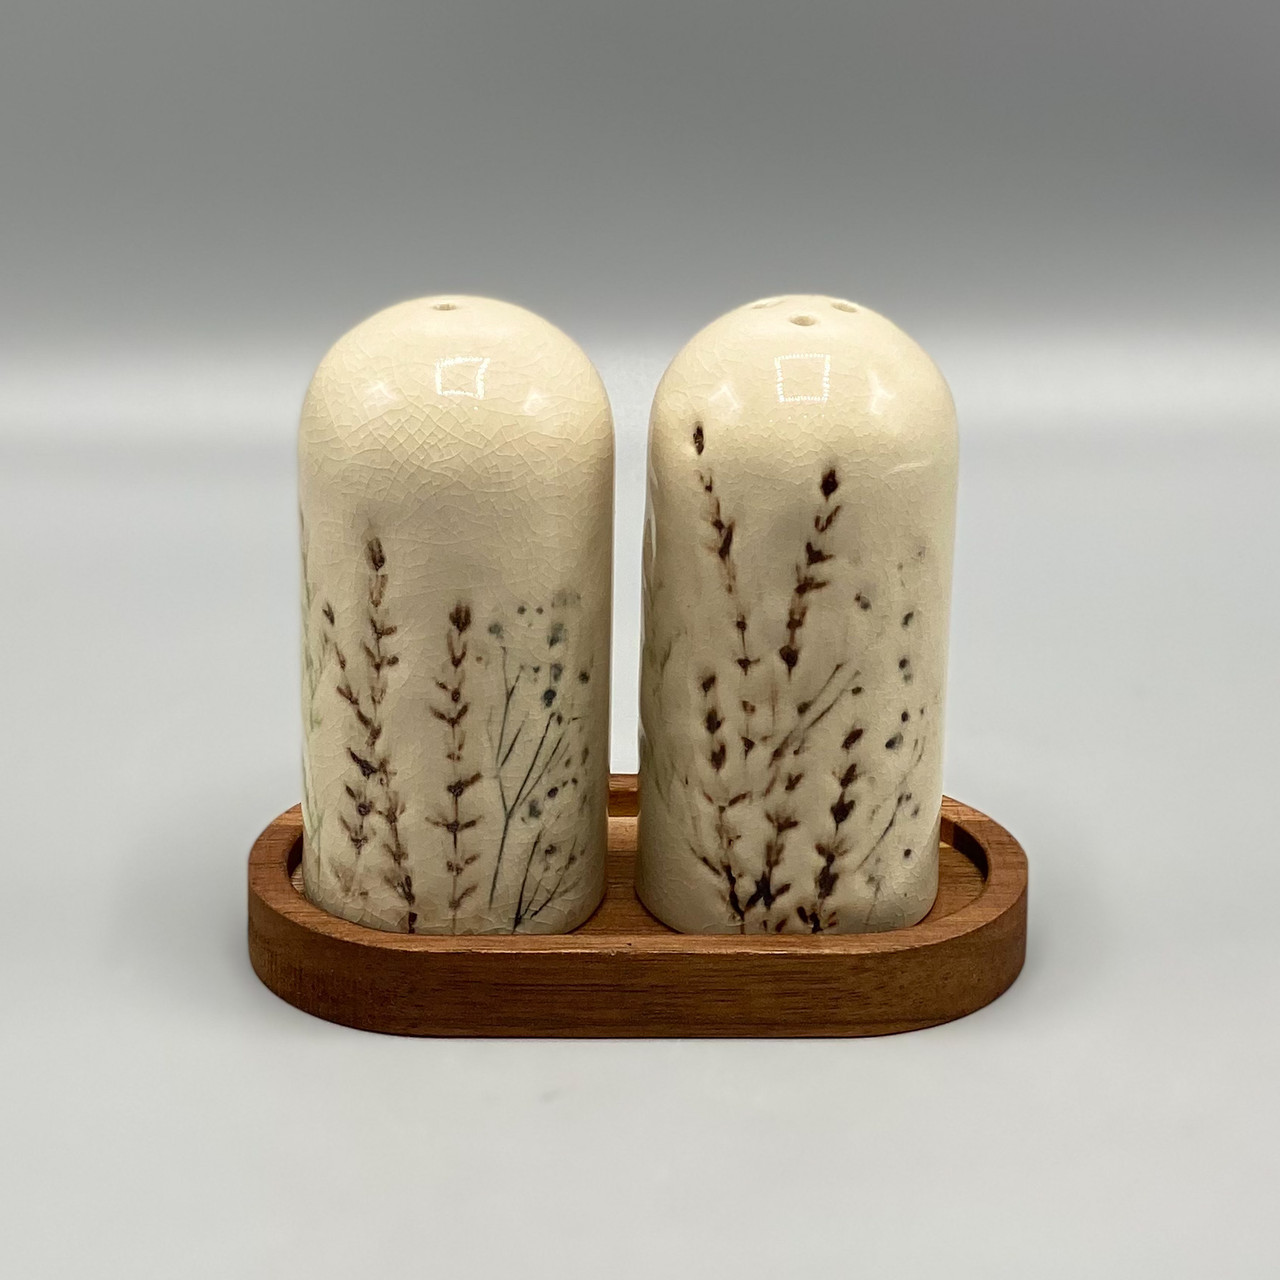 GENERAL ADMISSION Glazed Earthenware Clay Salt and Pepper Shakers for Men